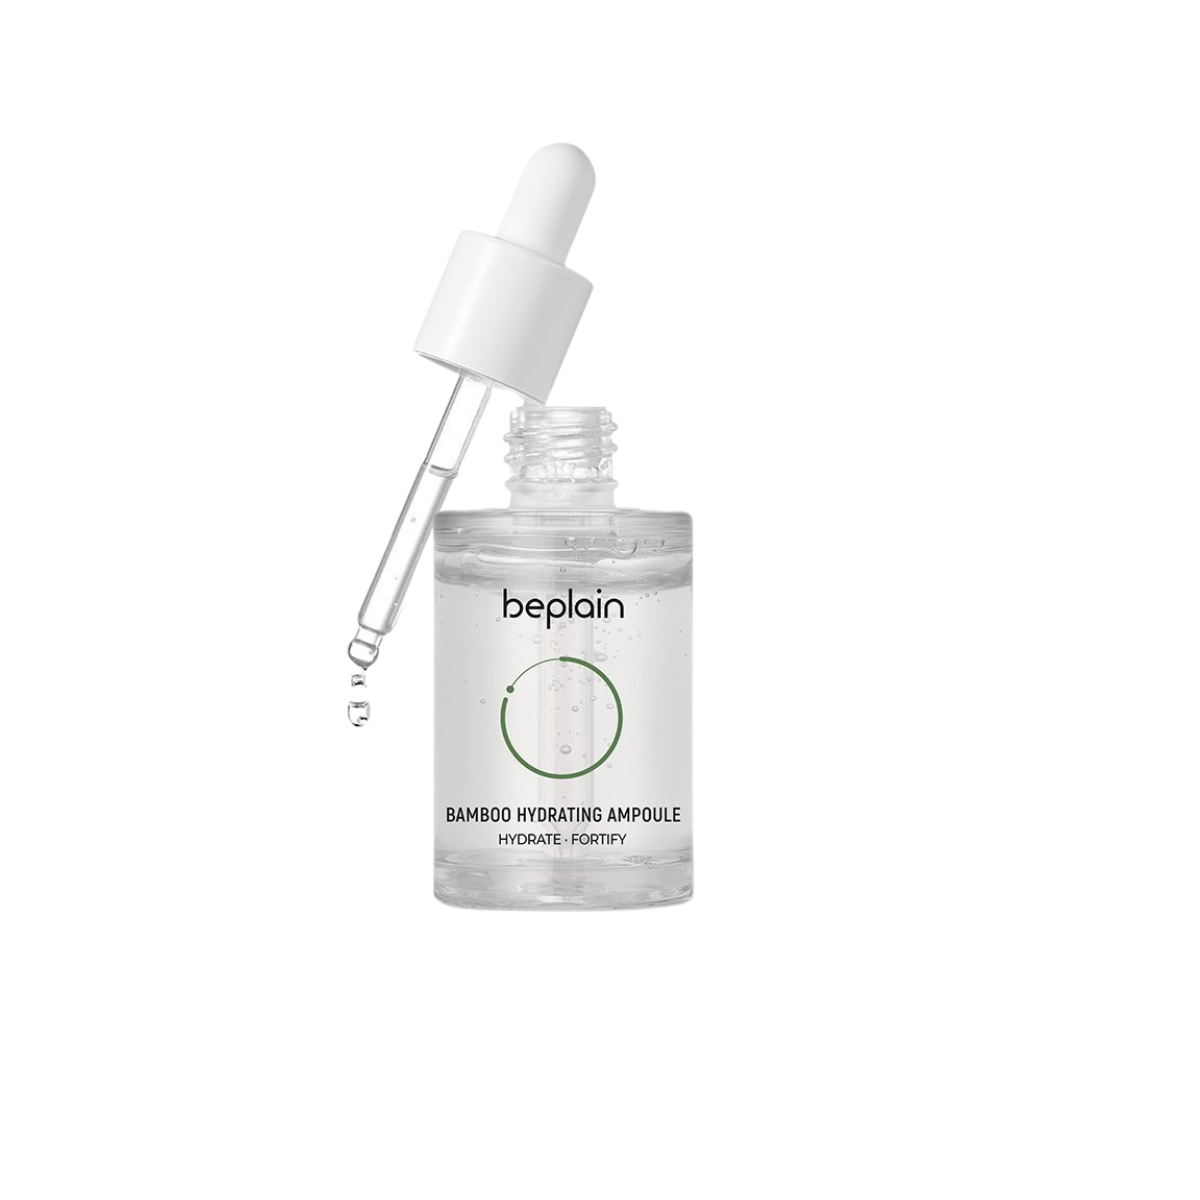 beplain - Bamboo Hydrating Ampoule - 5 ml